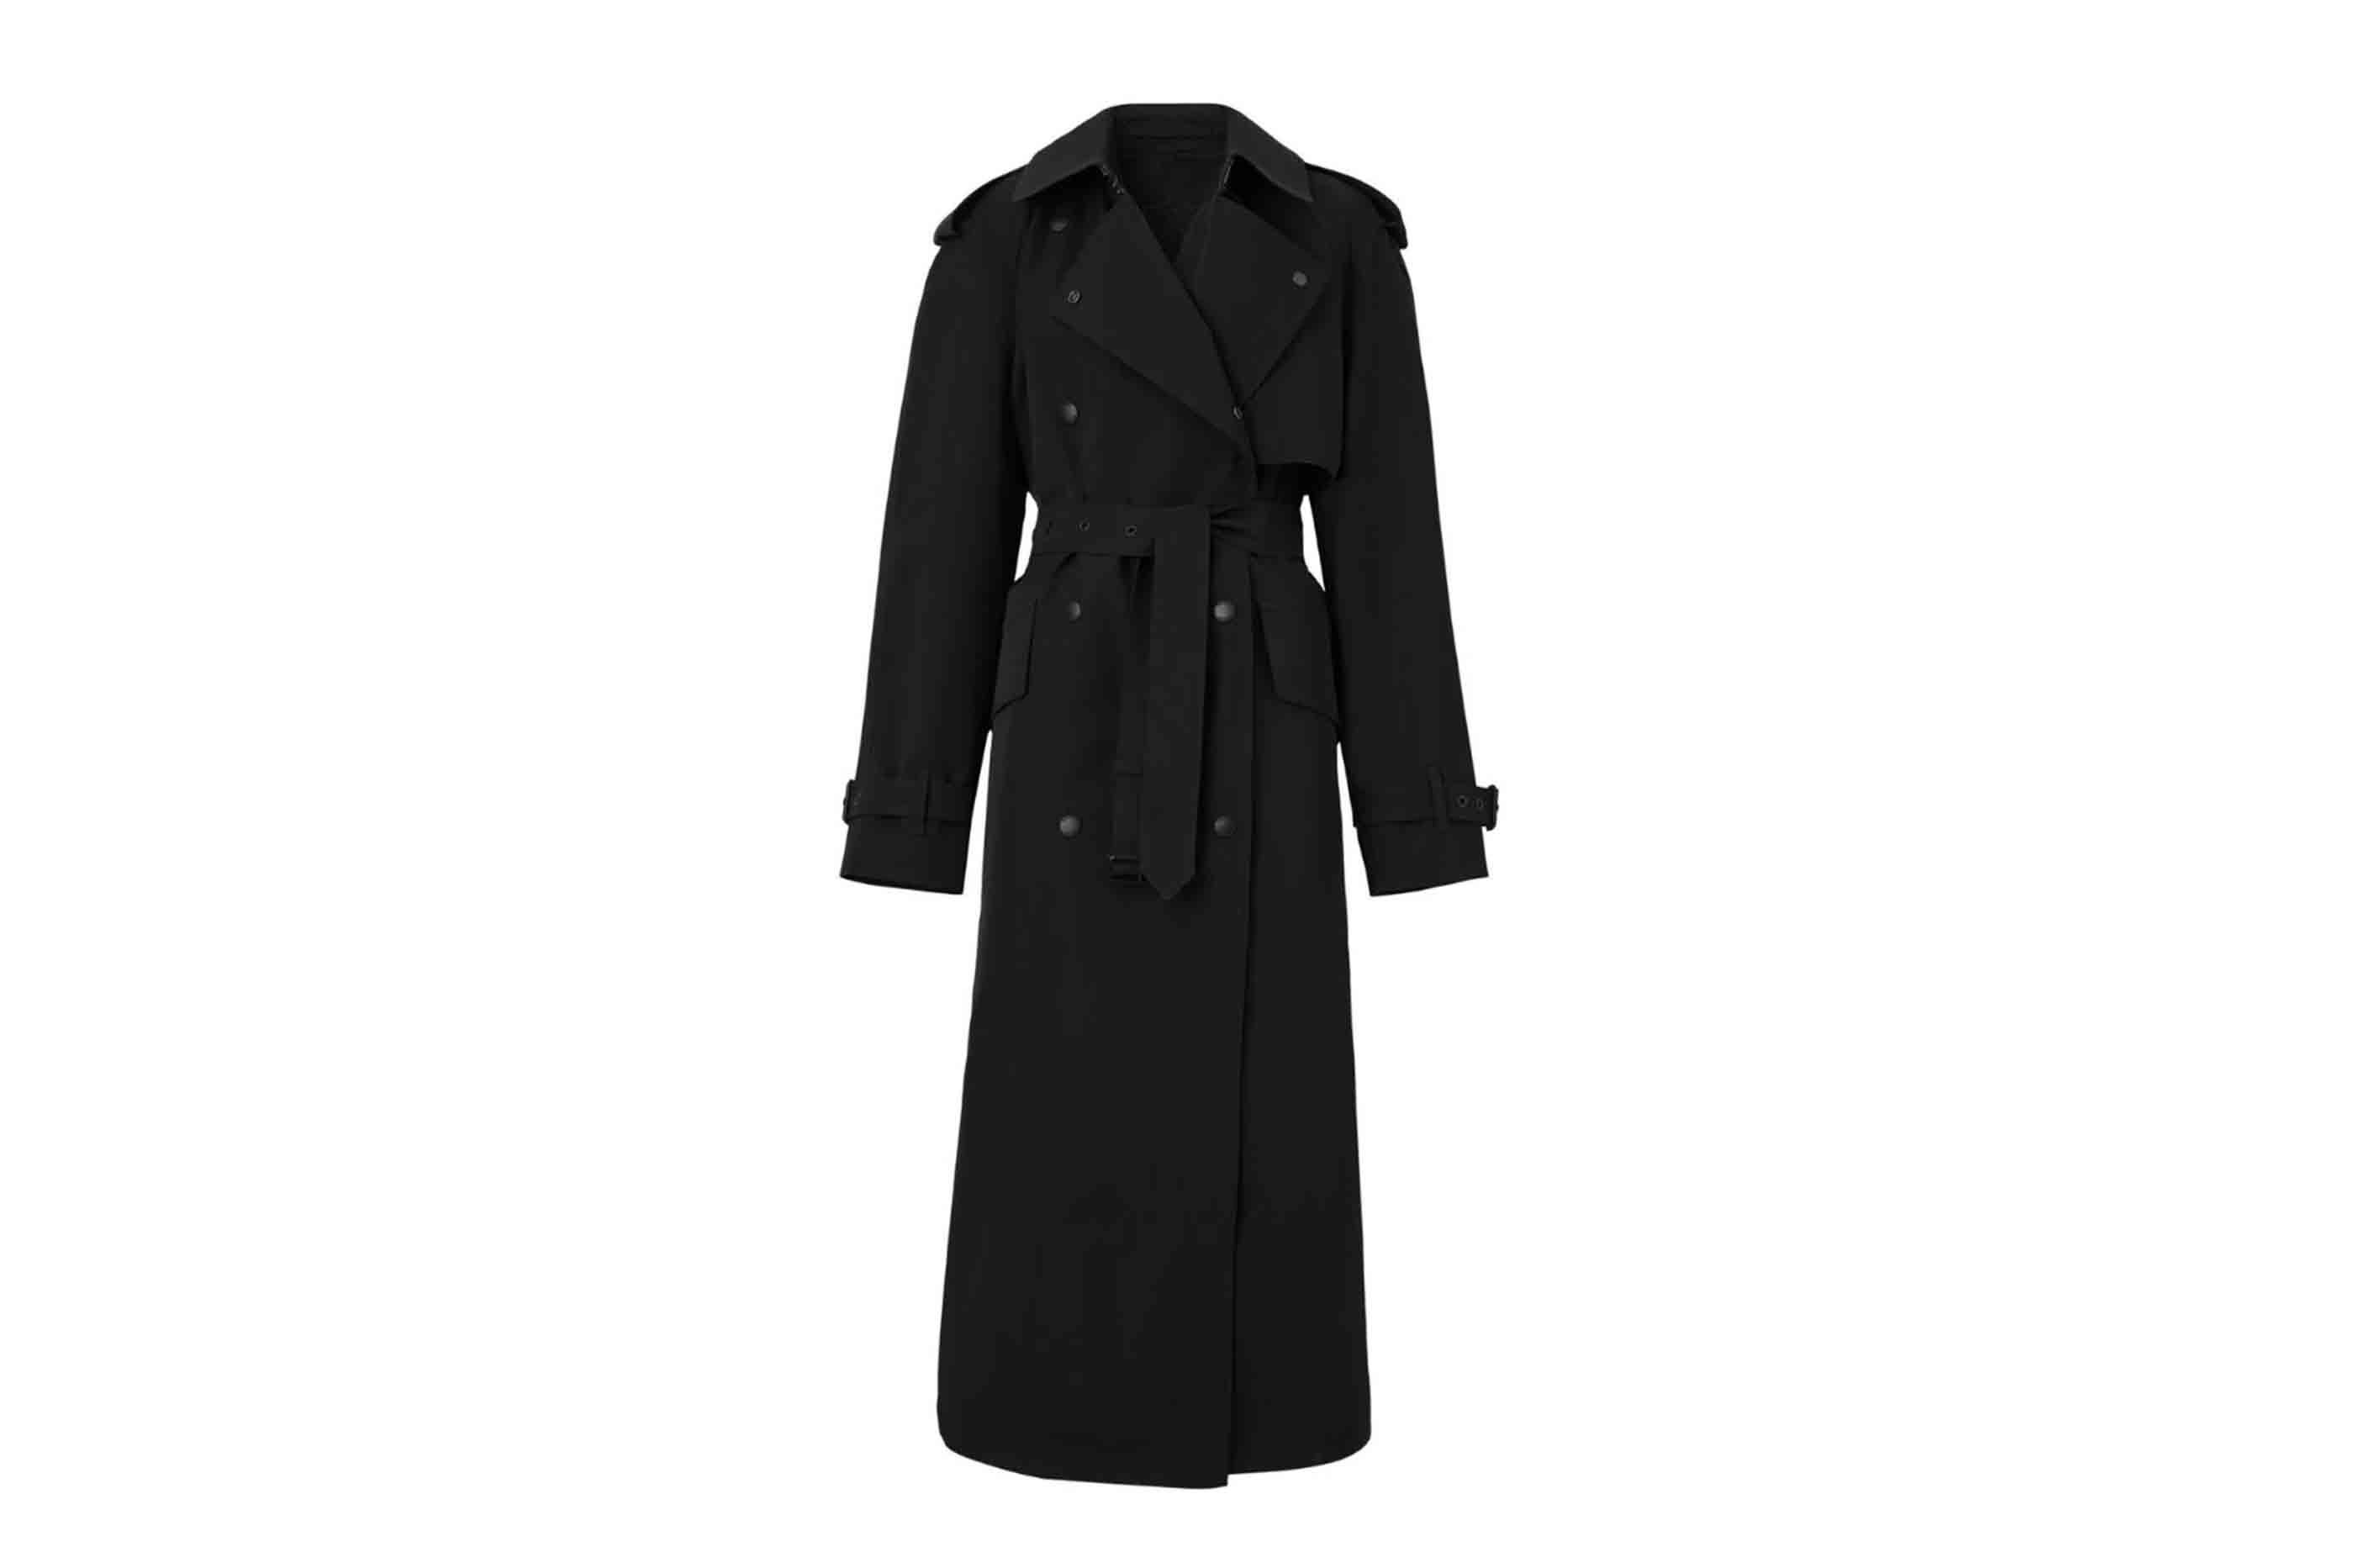 Best transitional coats to carry you through the seasons